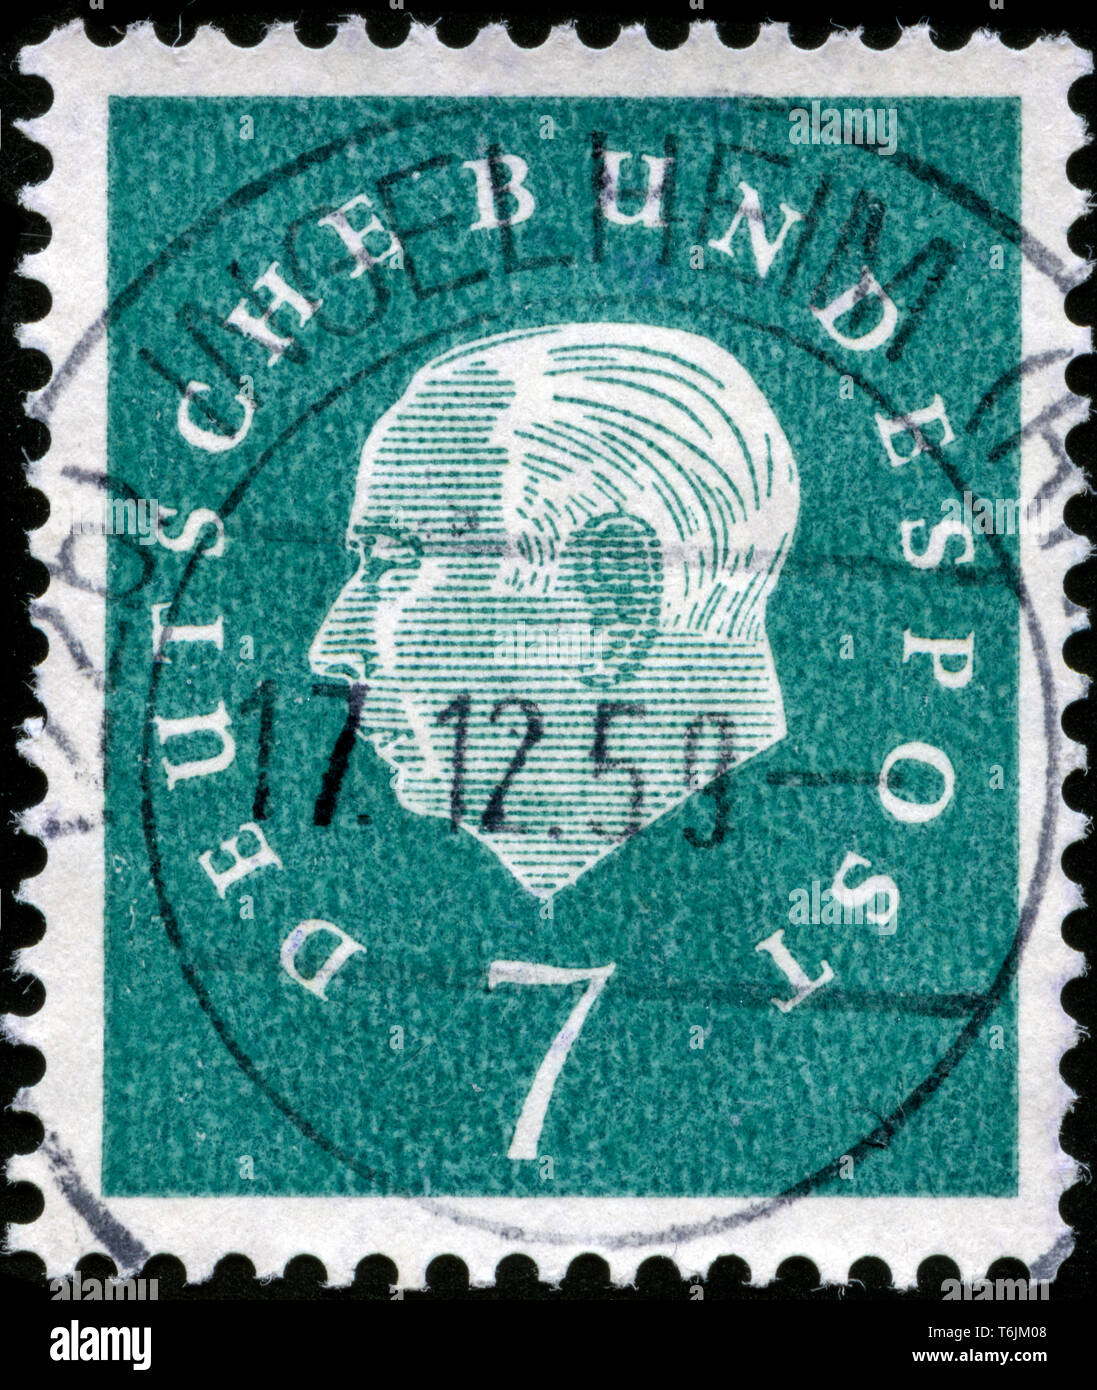 Postage stamp from the Federal Republic of Germany in the Federal President Theodor Heuss series issued in 1959 Stock Photo